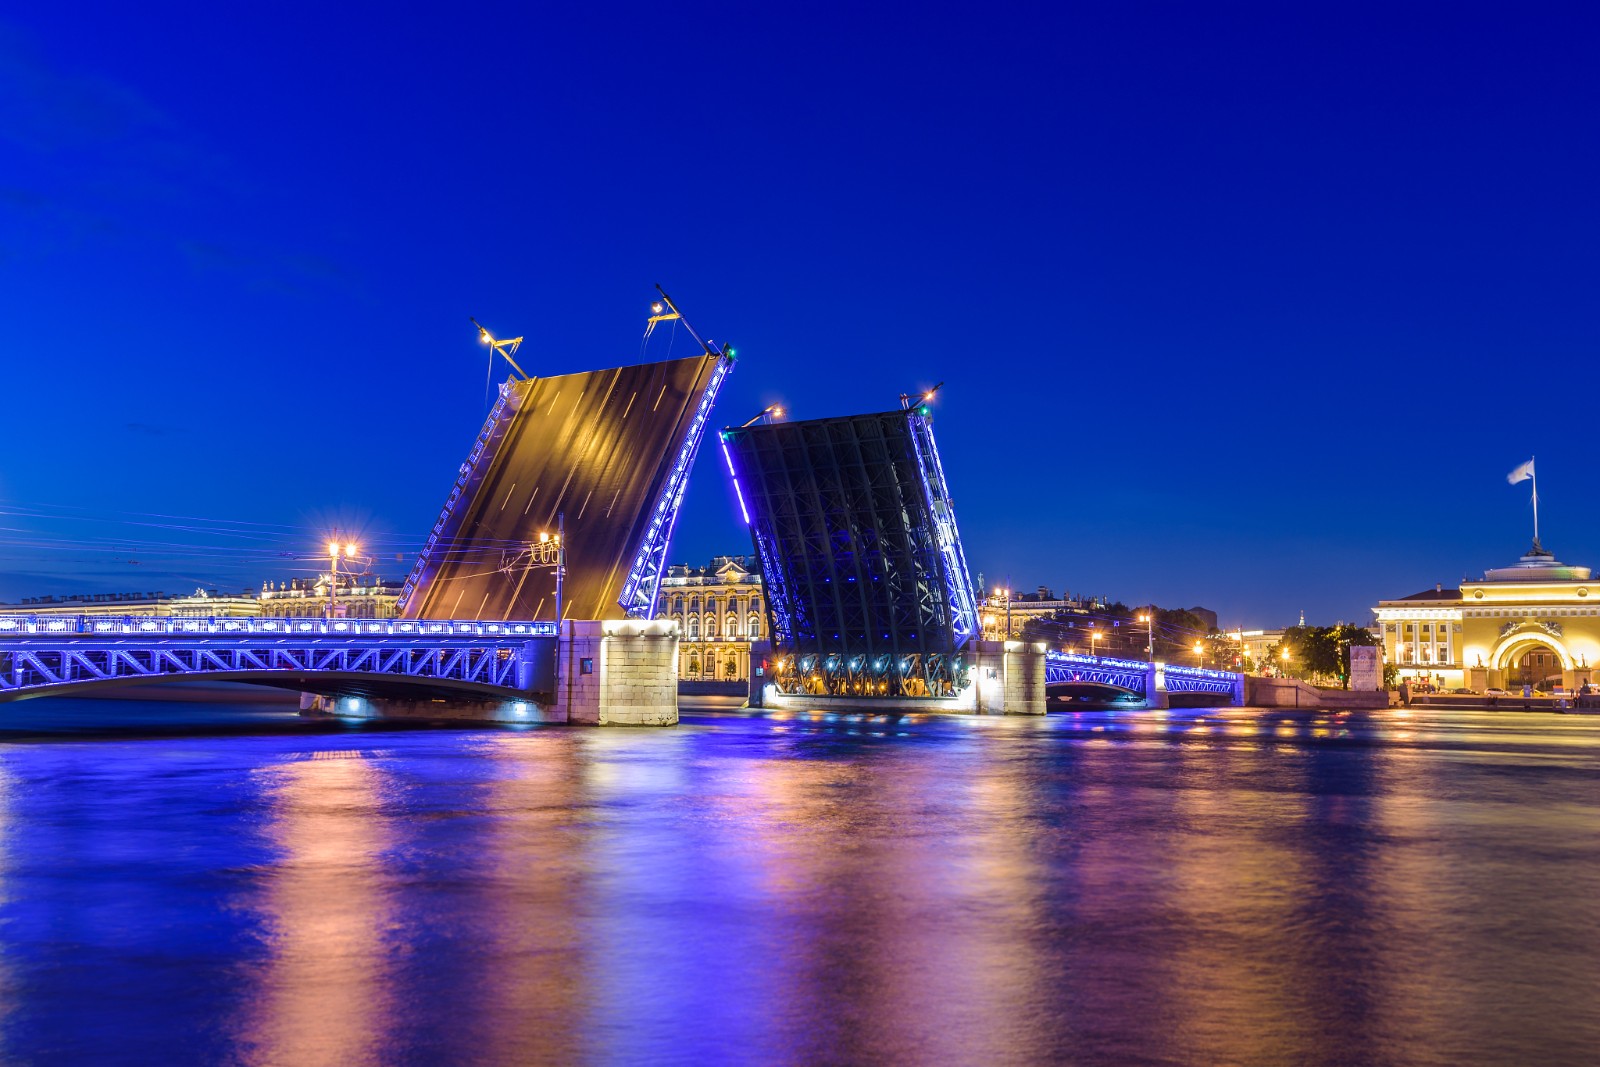 Stepping into St. Petersburg: A world of bridges